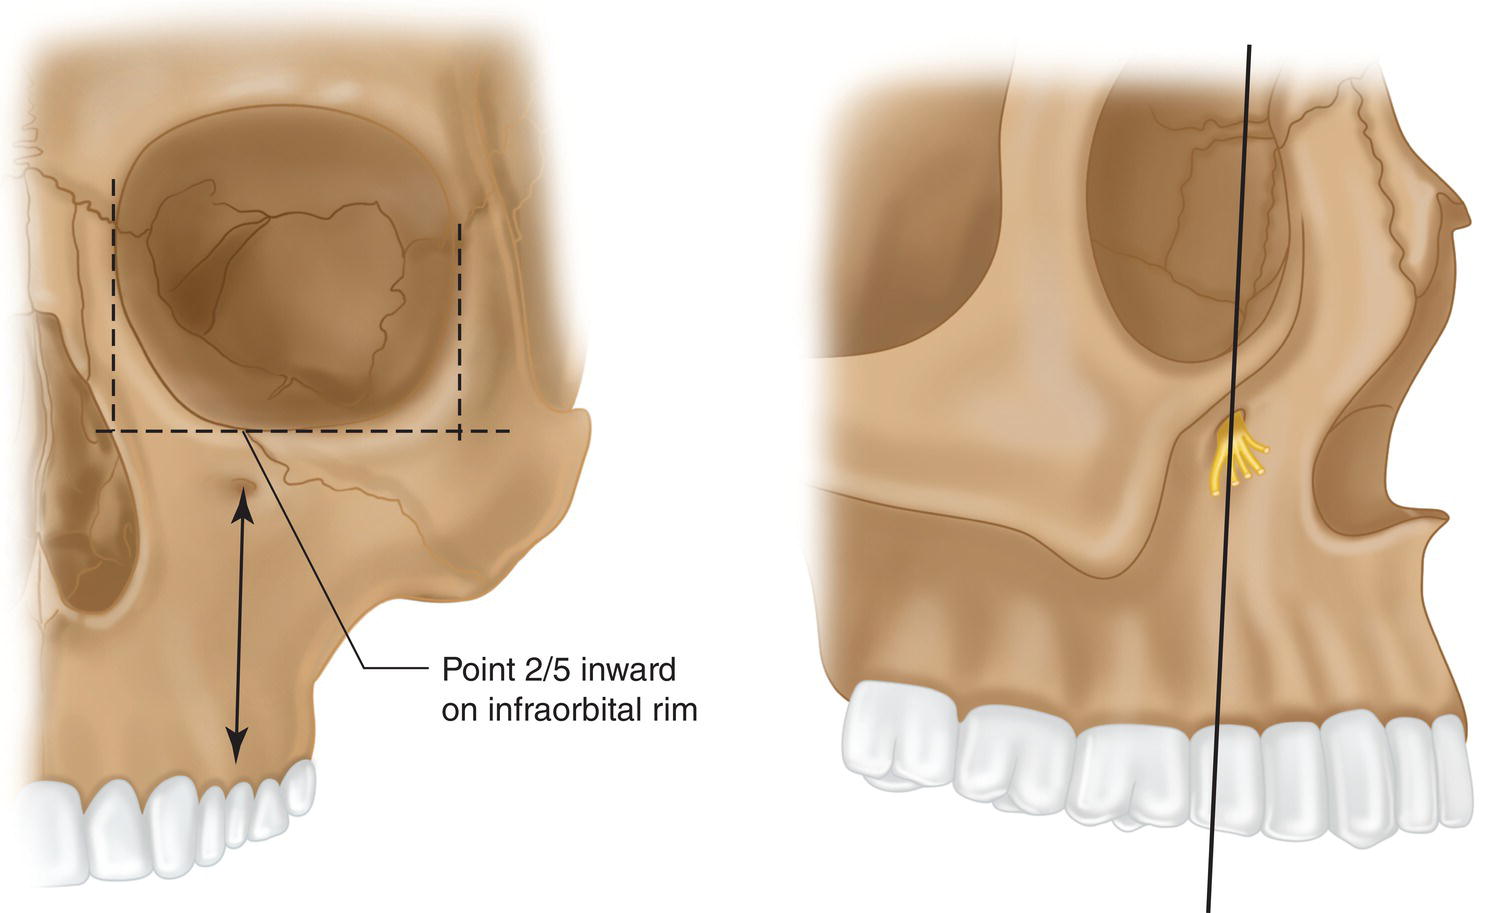 An illustration of infraorbital foramen in the front and side views of a skull at a point two-fifths inward on the infraorbital rim.